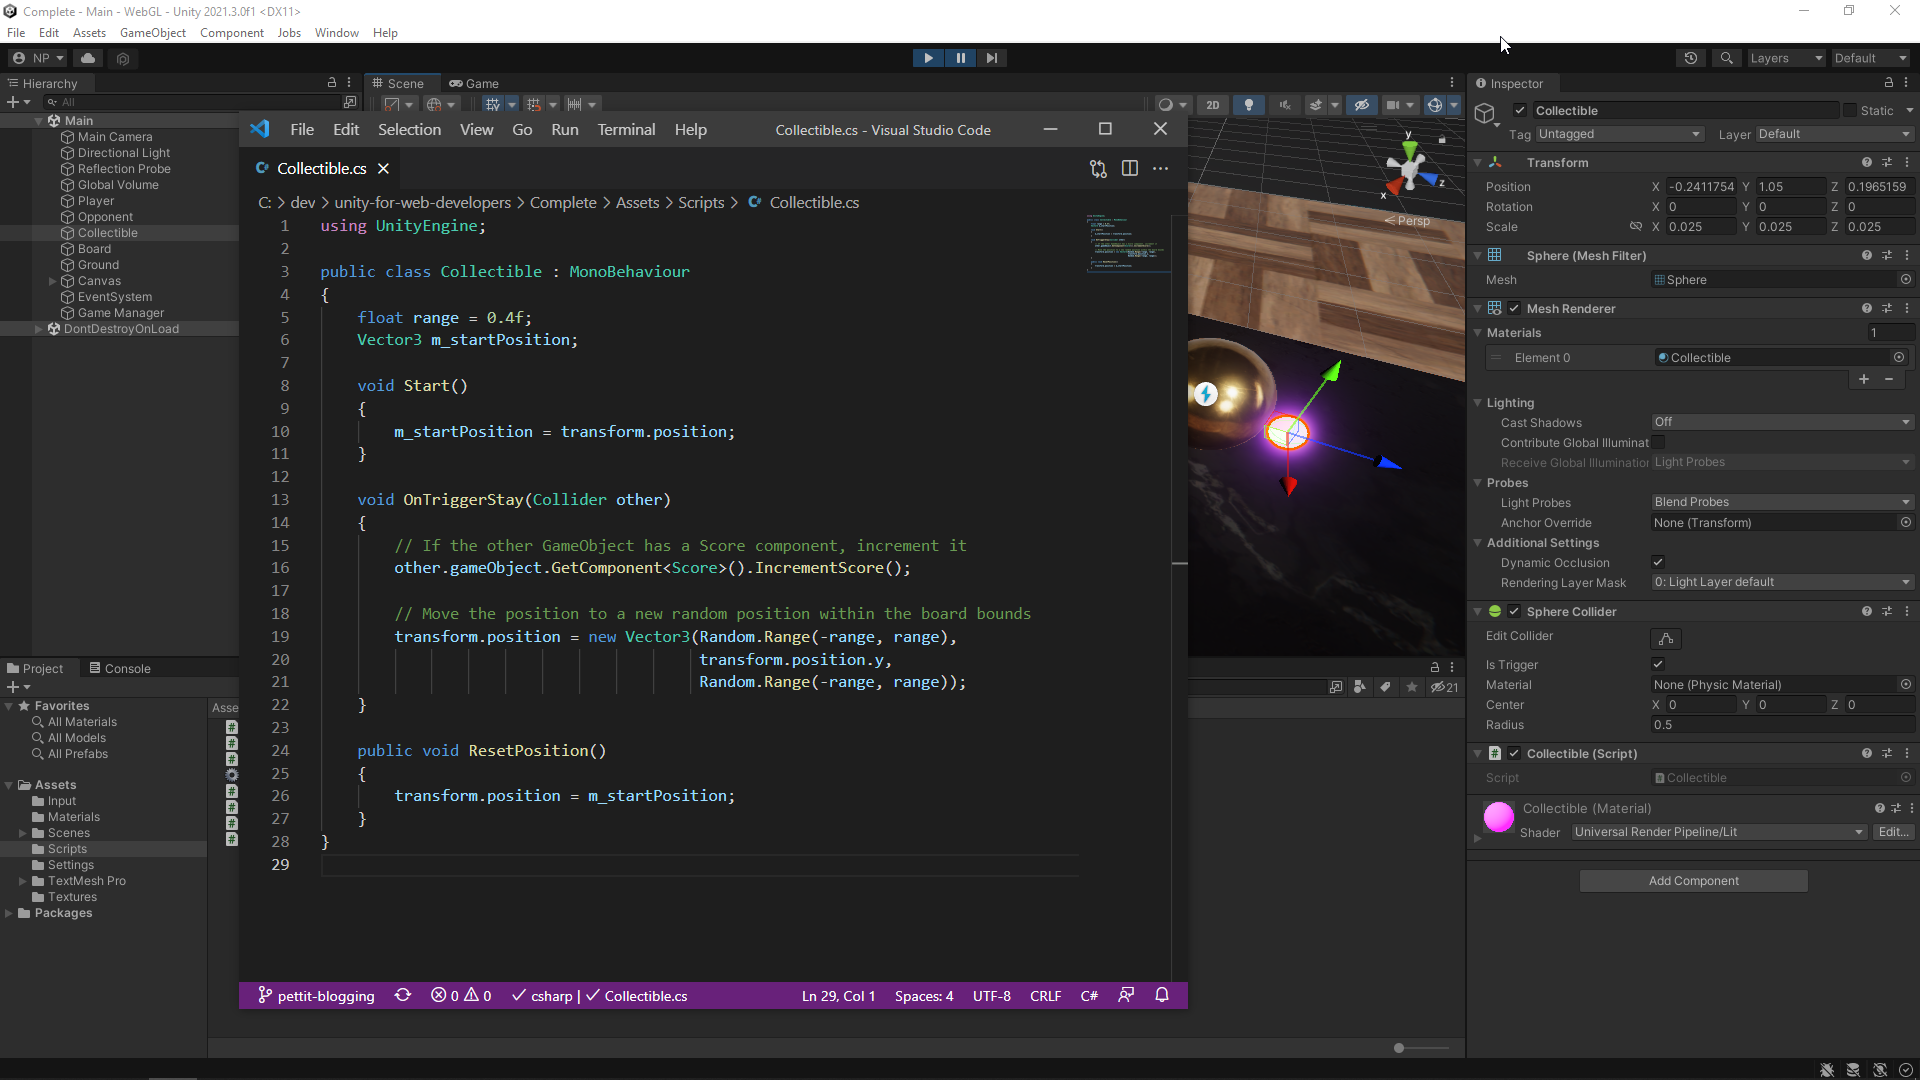 Screenshot of Visual Studio Code overlaid on top of Unity. The code file contains a script called Collectible.cs and contains code that allows players to collect a glowing sphere. In Unity, the same script component can be seen attached to a GameObject.